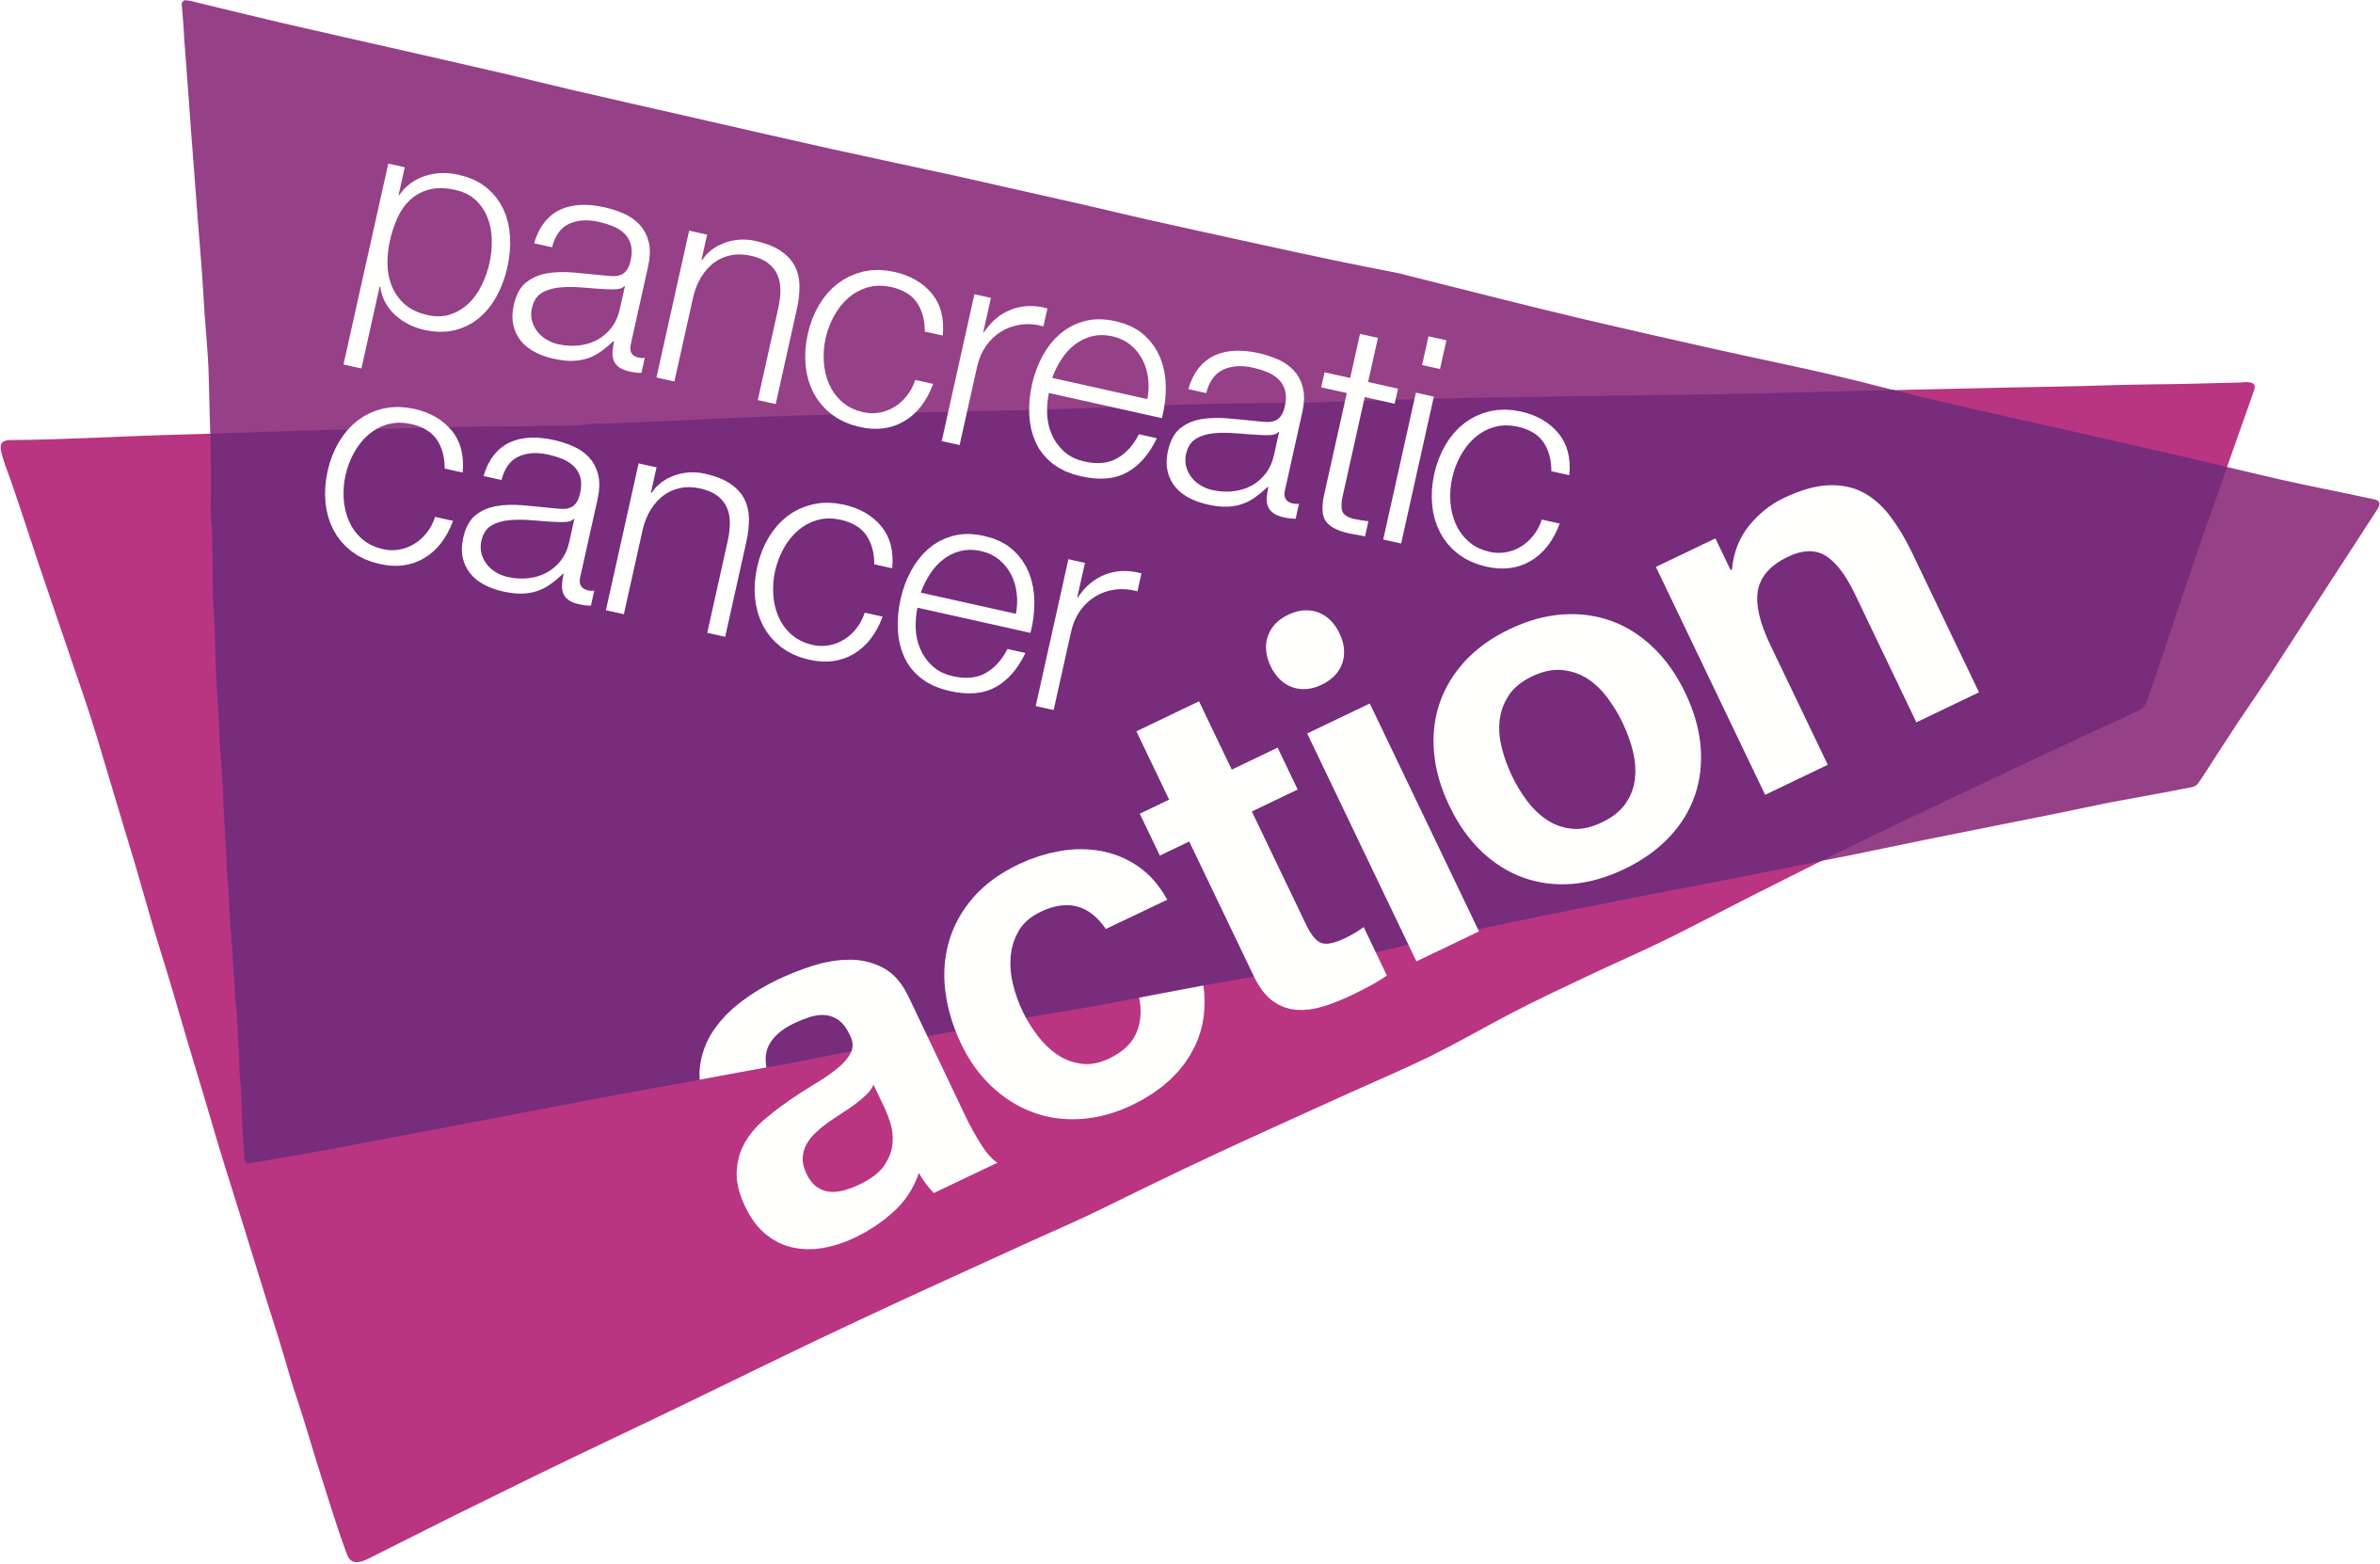 pancreatic cancer action network)